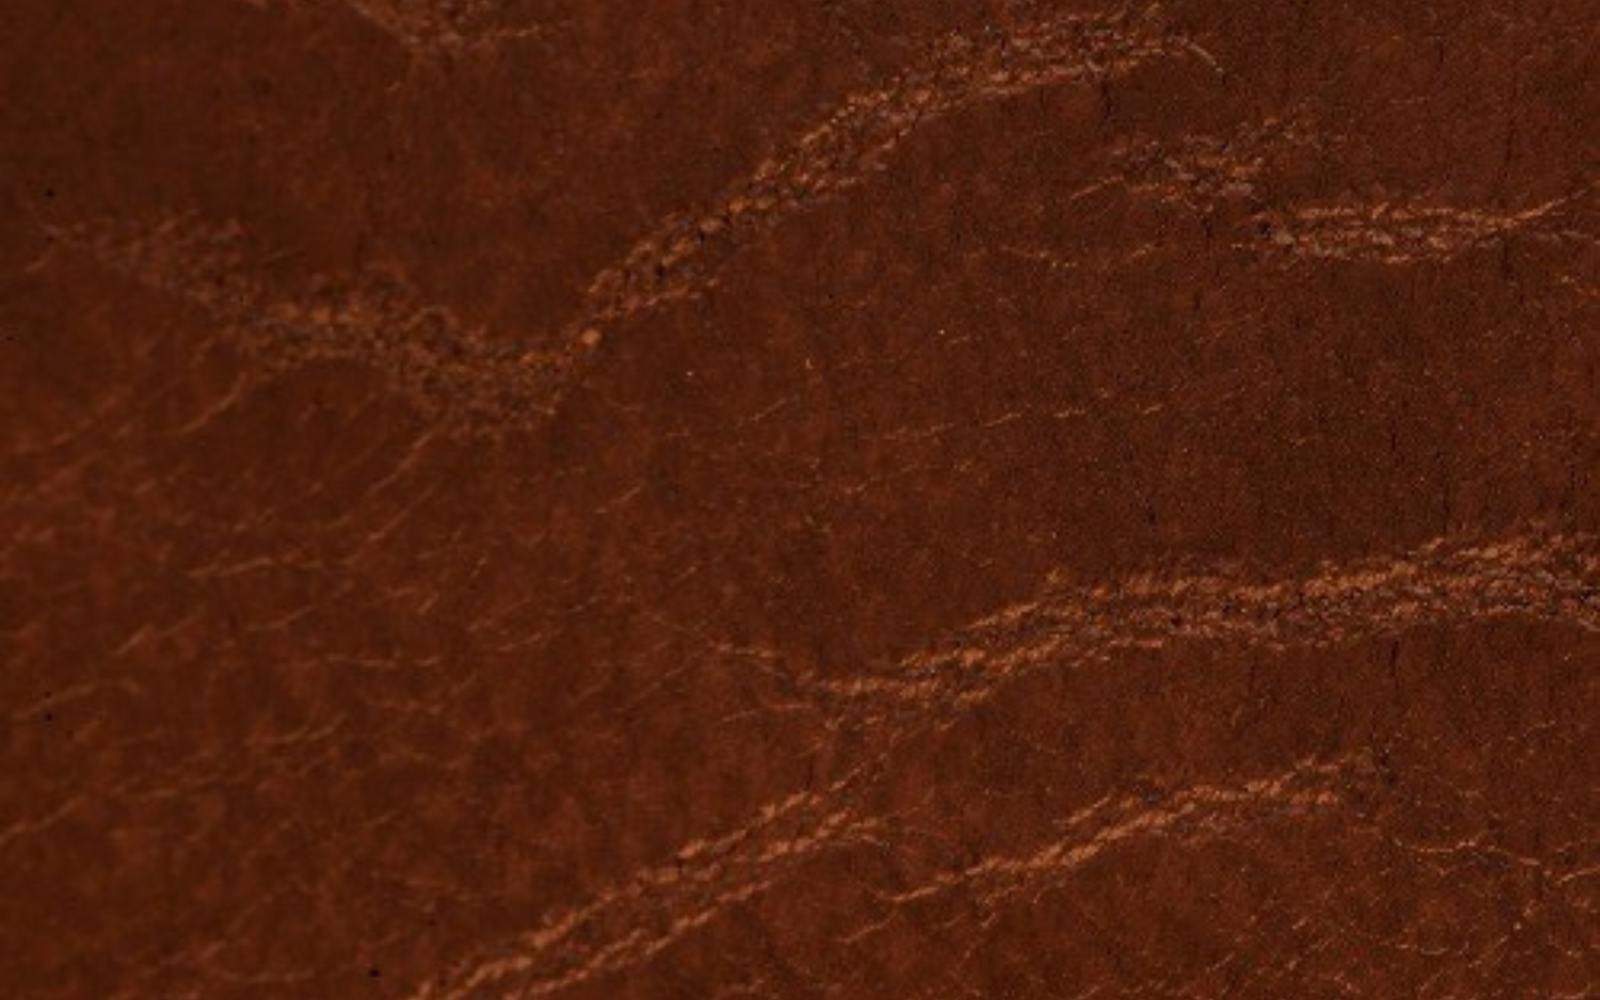 Stretch marks on leather hide